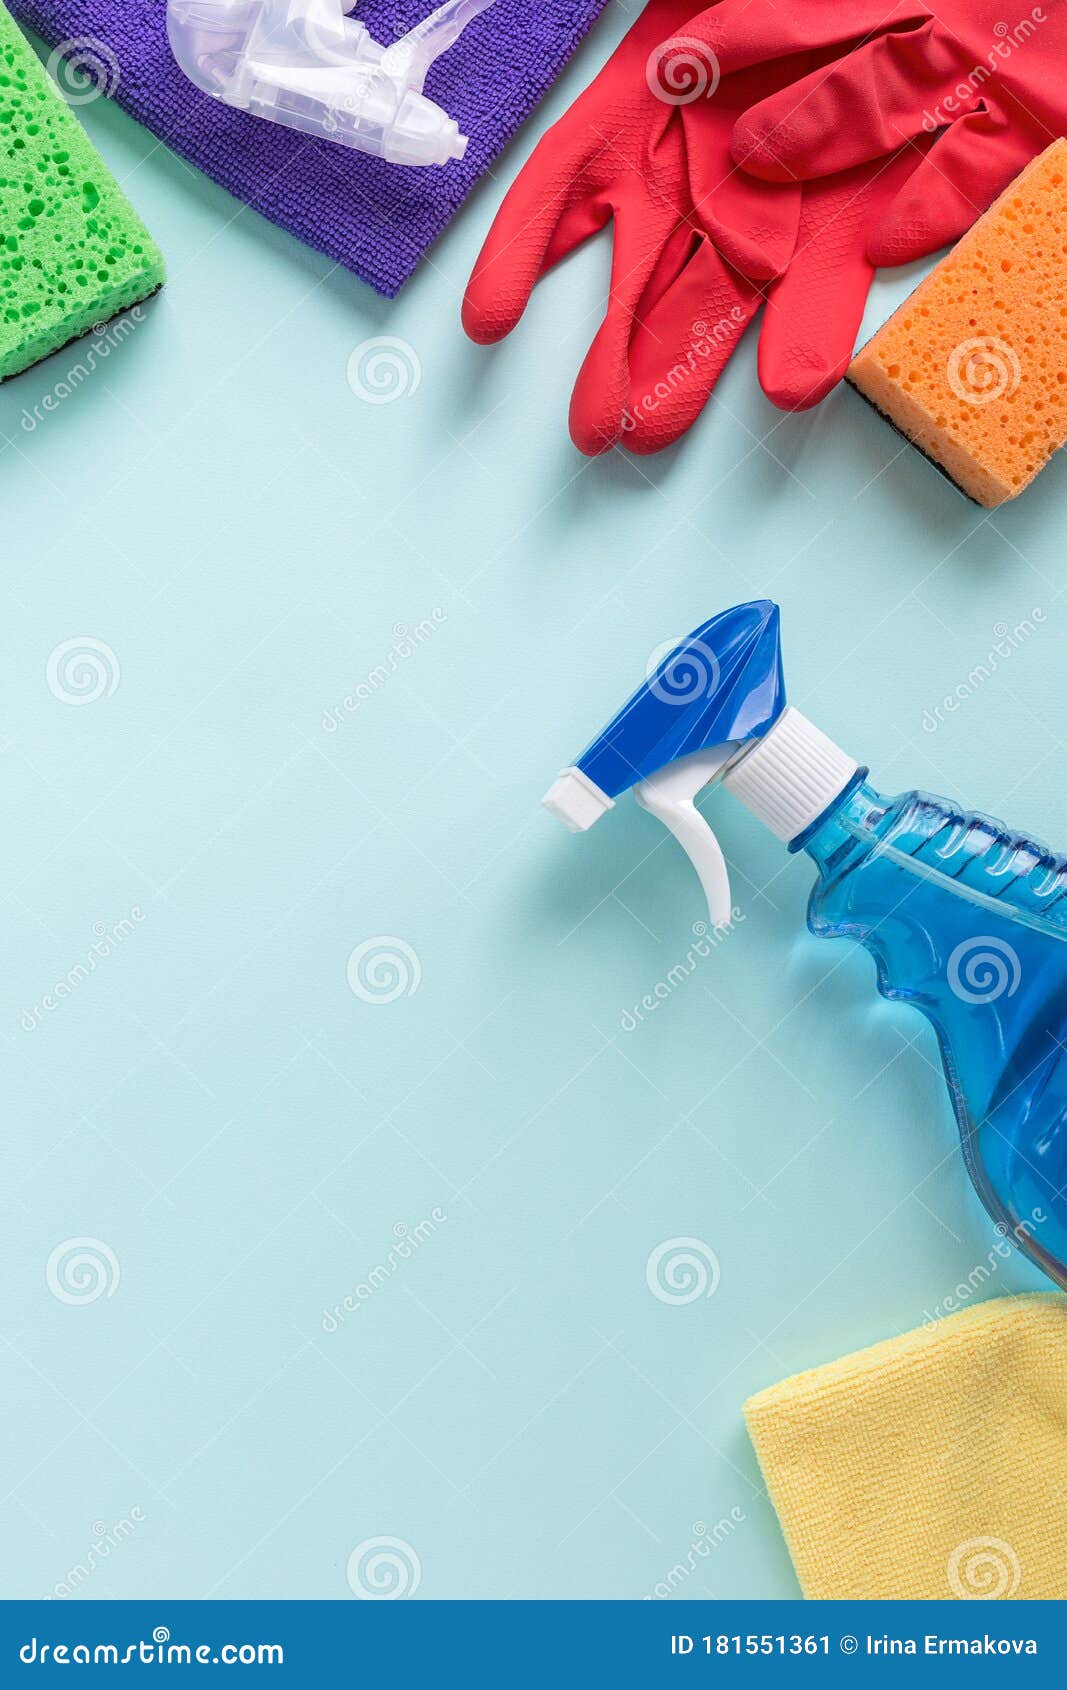 https://thumbs.dreamstime.com/z/cleaning-supplies-flat-lay-copy-space-fro-text-vertical-composition-detergents-accessories-different-surfaces-kitchen-181551361.jpg